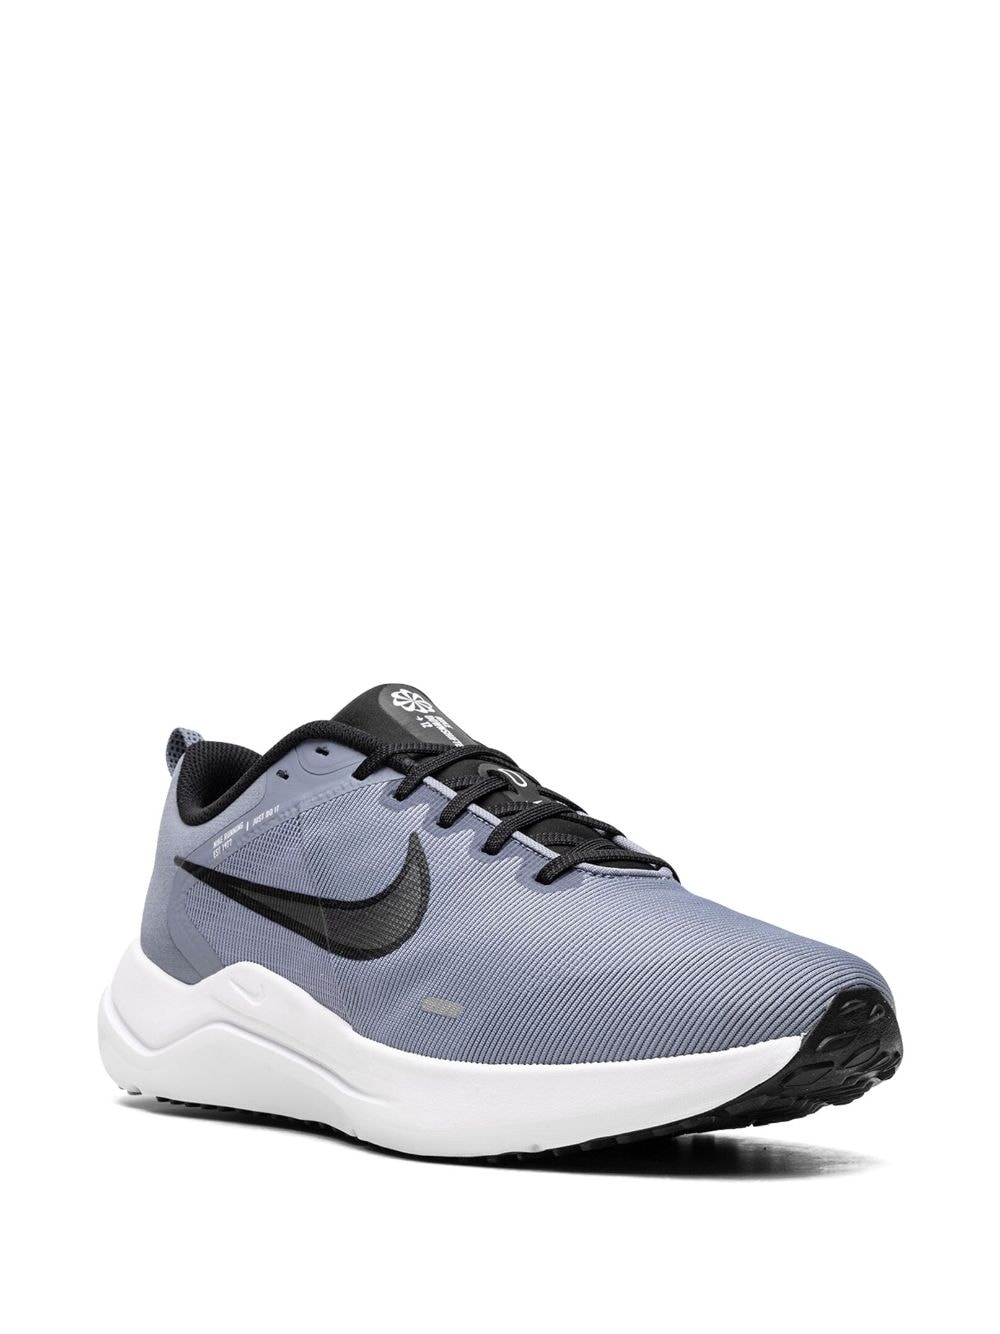 Image 2 of Nike "Downshifter 12 4E ""Blue"" sneakers"